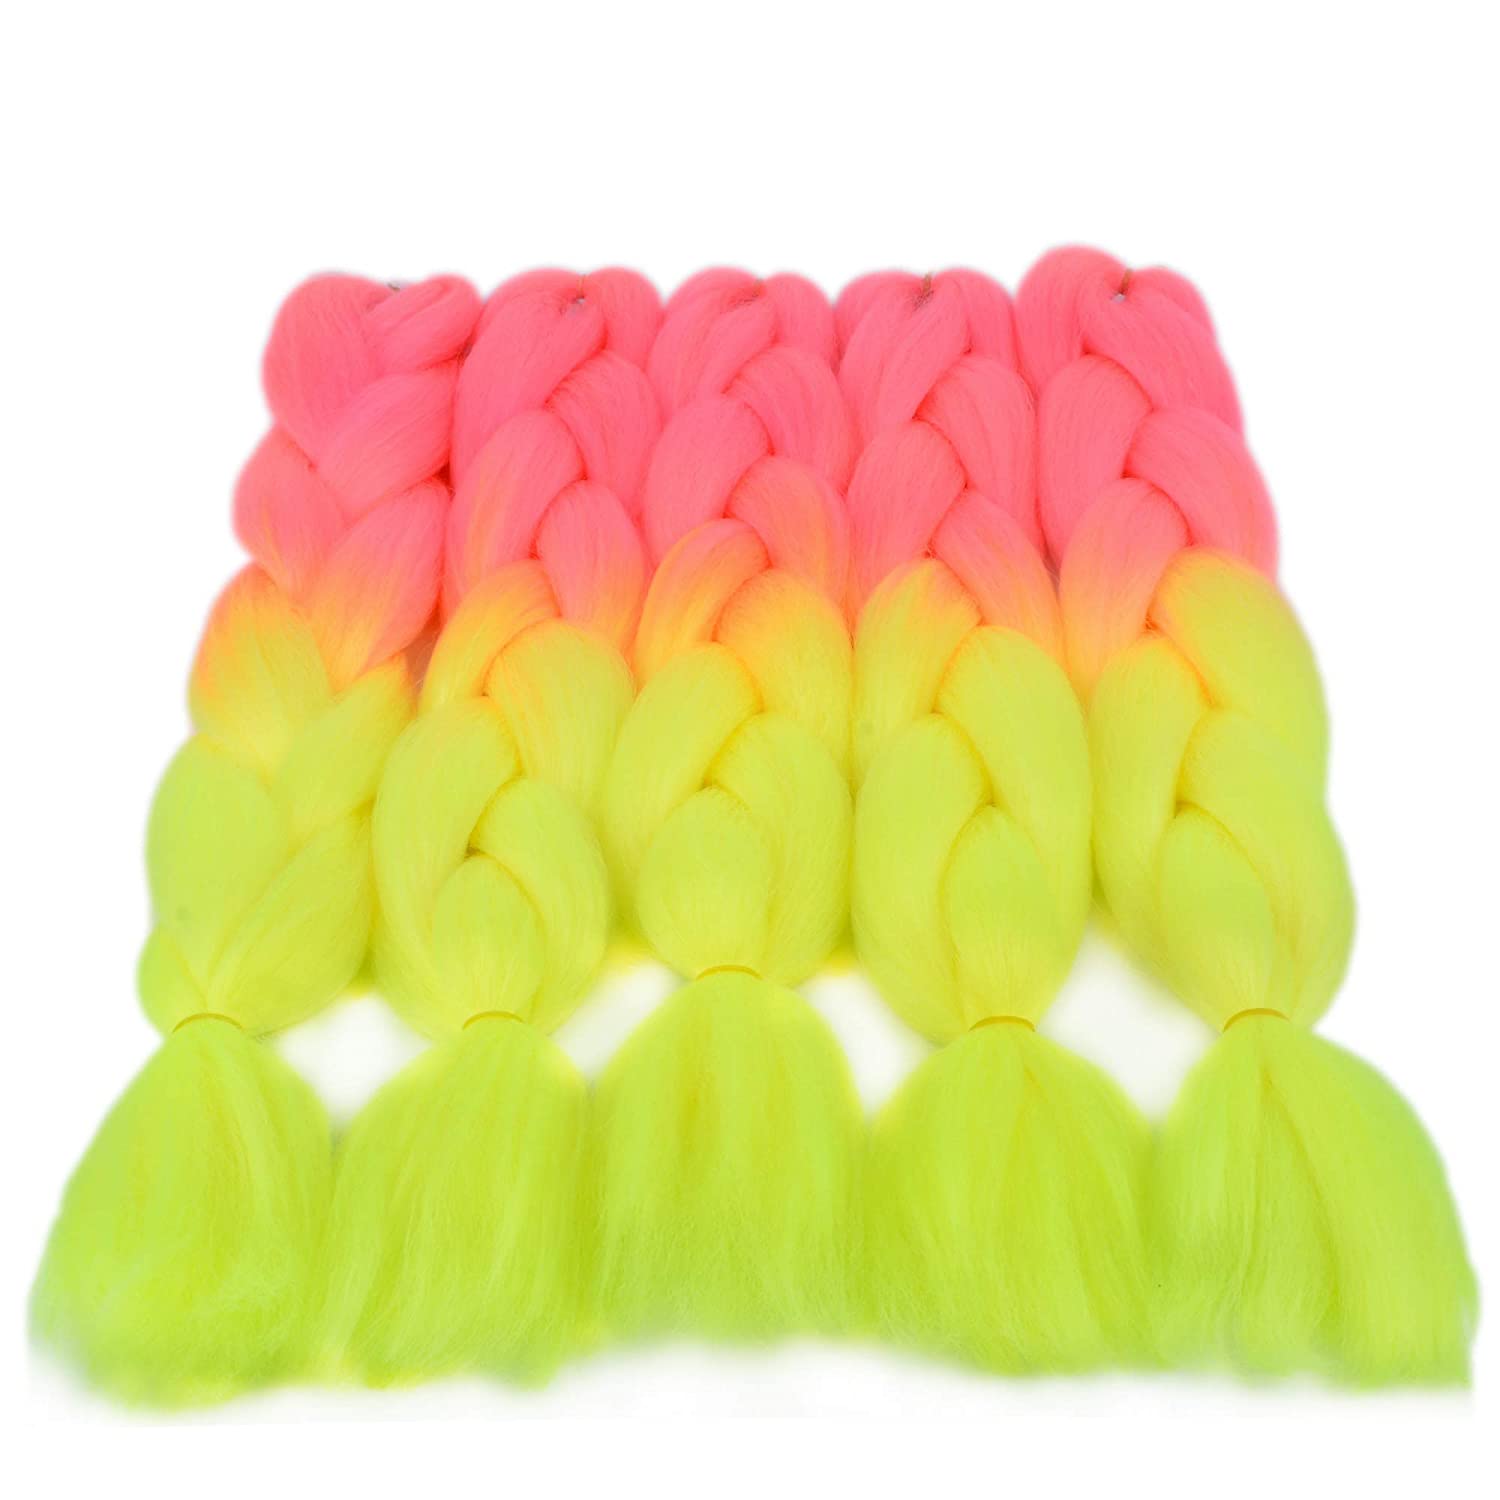 Lans Ombre Jumbo Braid Hair 24 Inch Synthetic Hair In Blonde, Pink, And  Green Shades 100g/Pcs Box African Braid In Dreads From Lanshair, $0.62